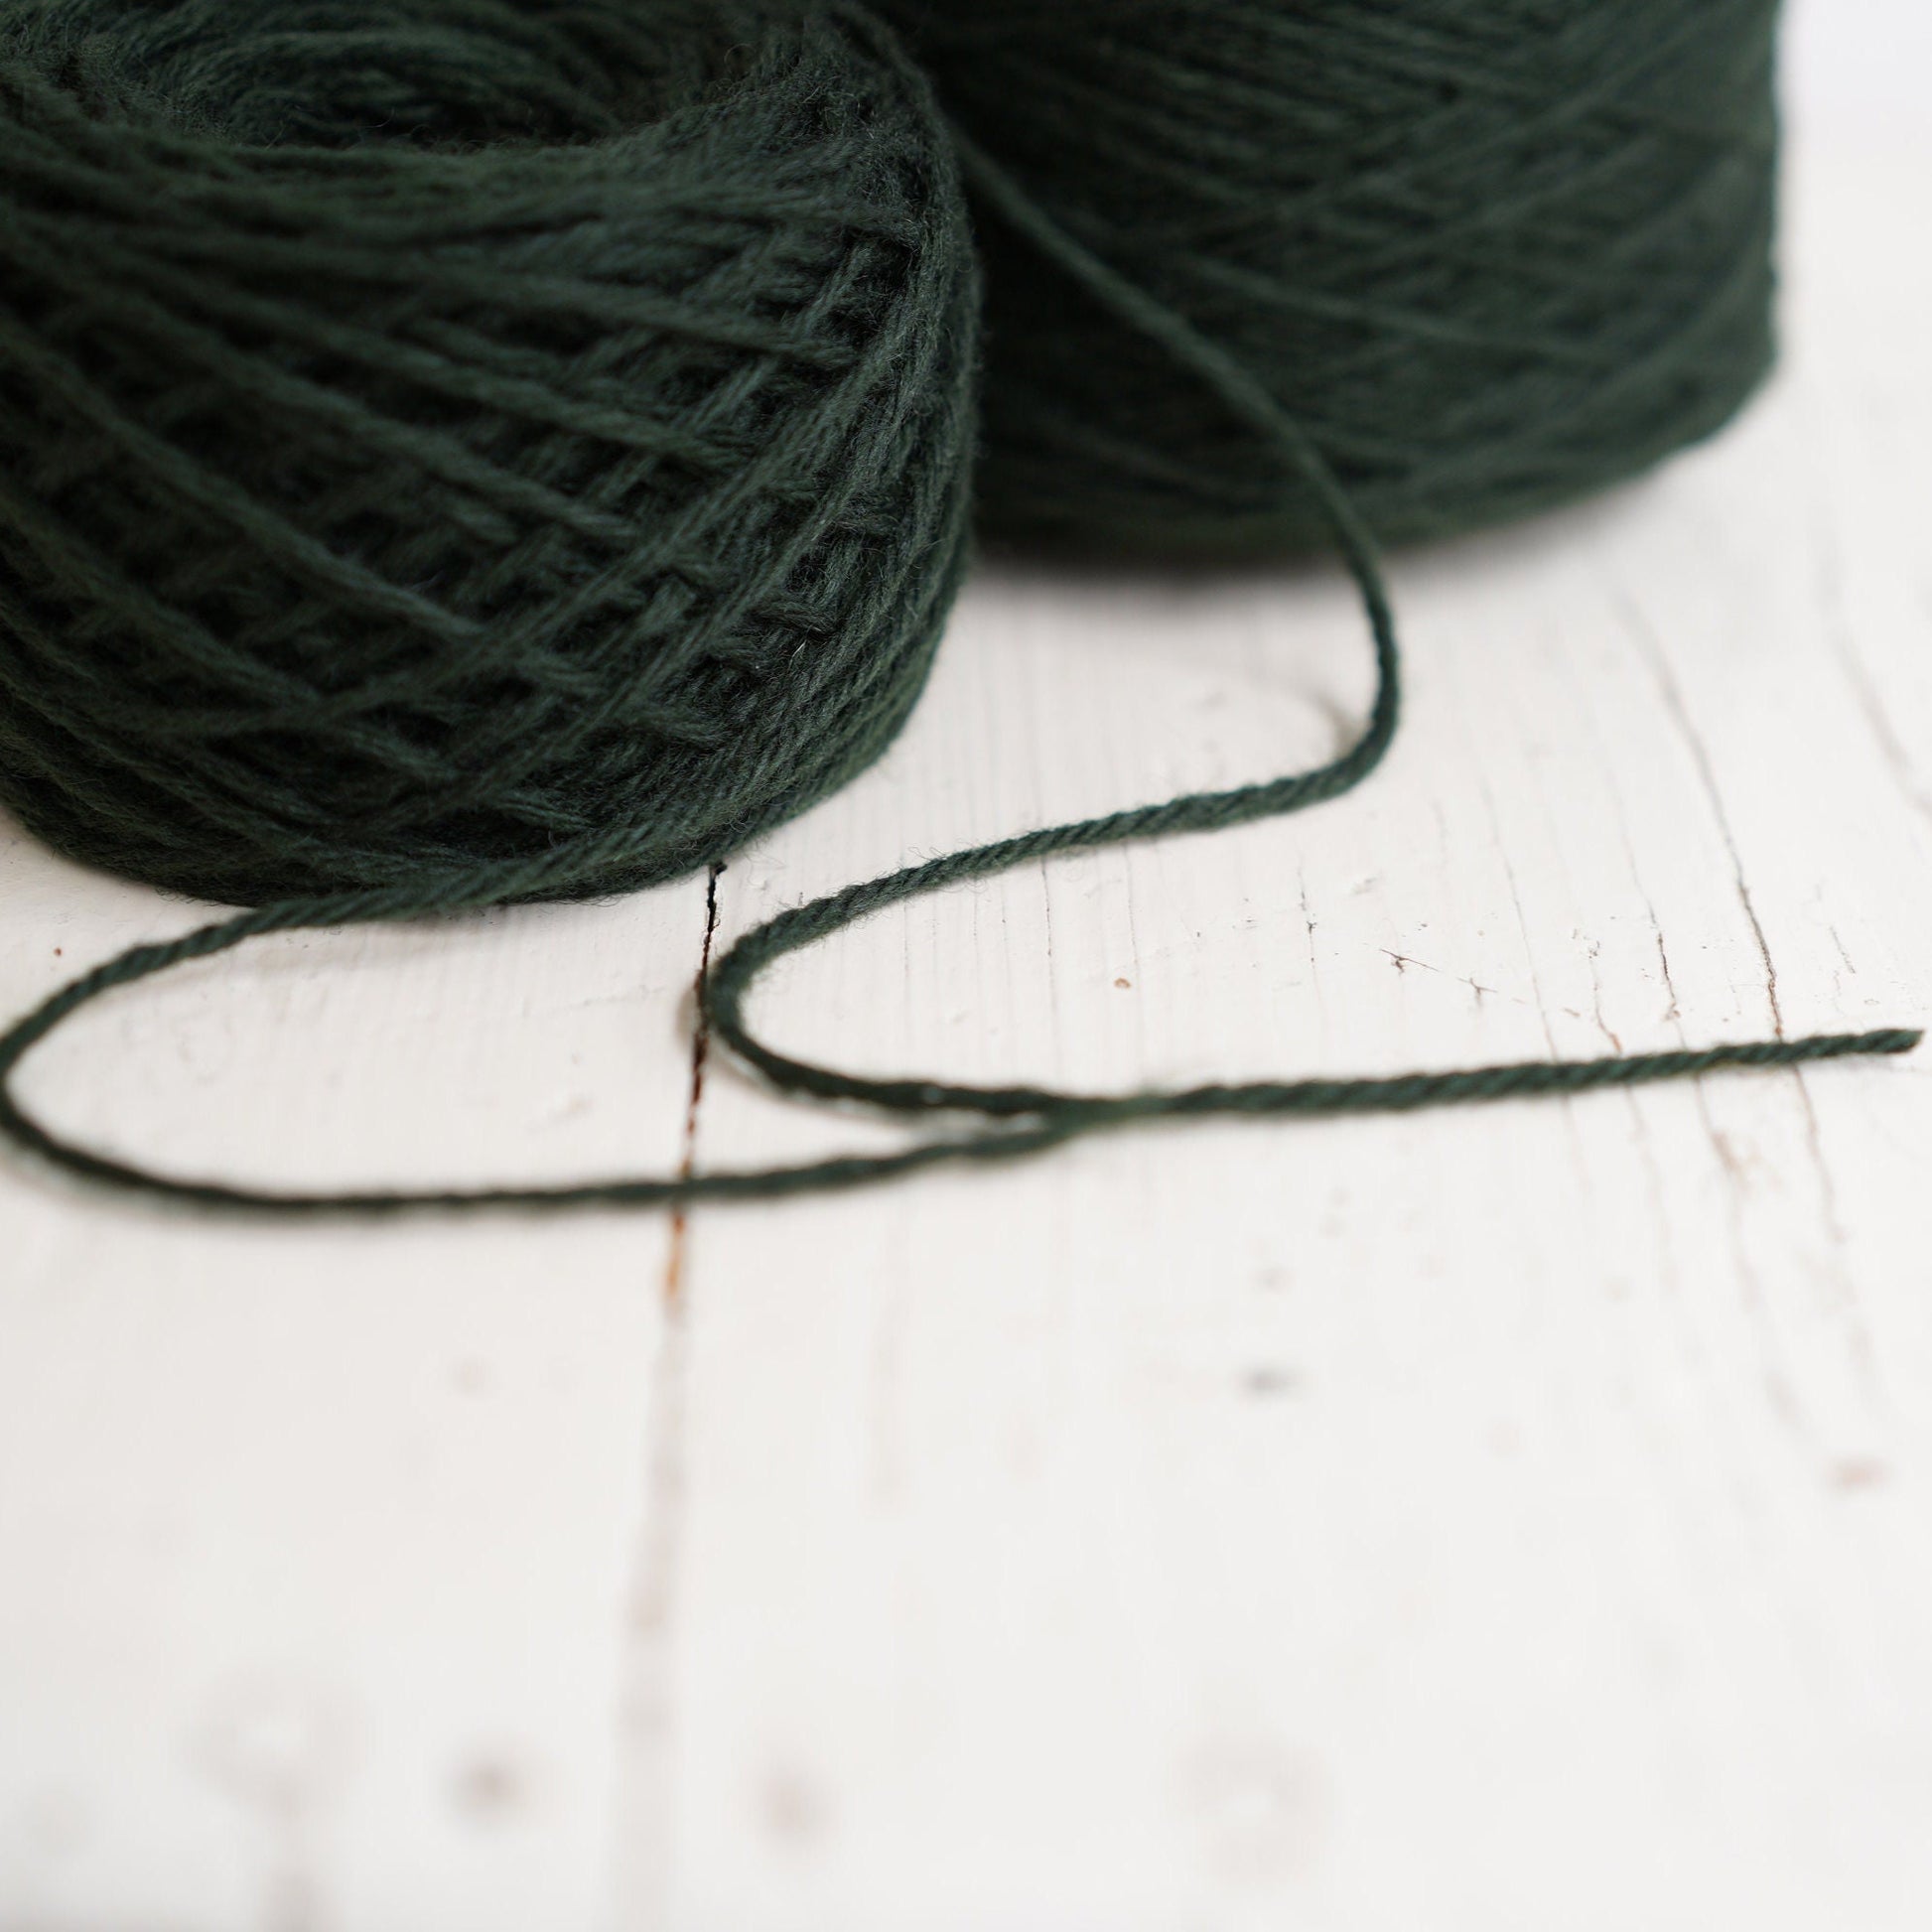 Forest green wool for knitting, Yarn for knitting